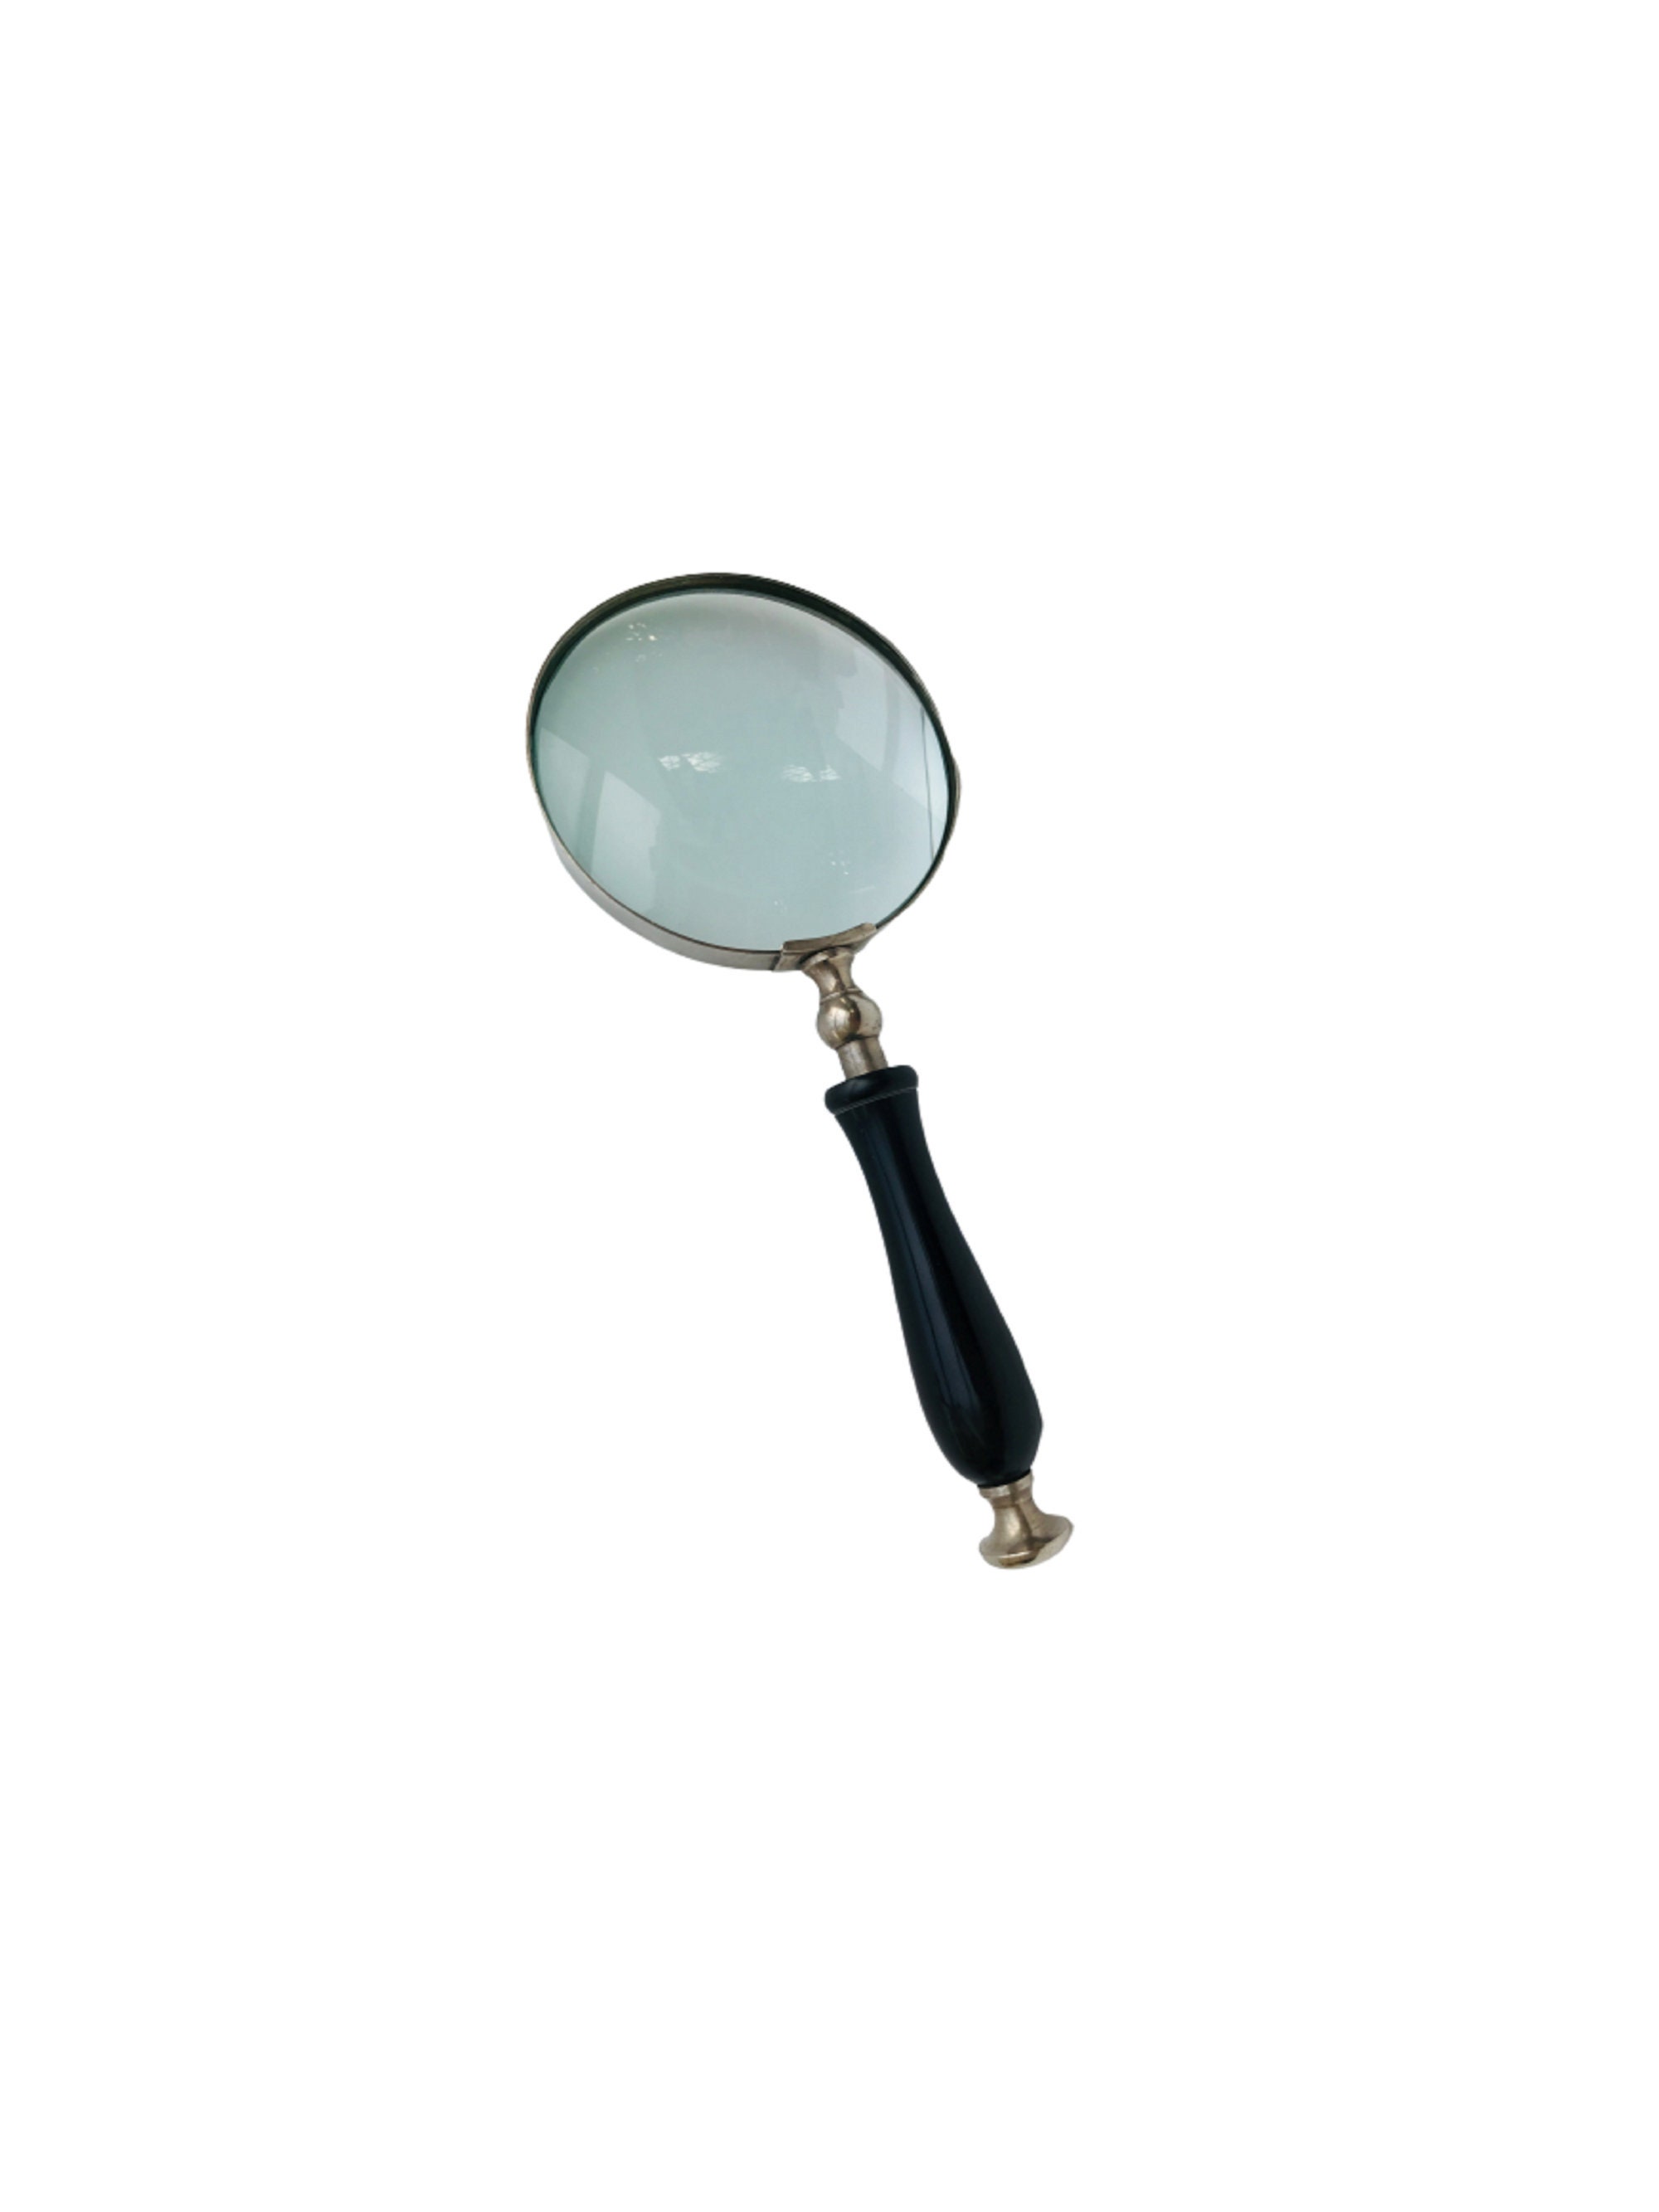 Handheld Magnifying Glass With Handle - Antique Copper Magnifier, 10x  Magnification